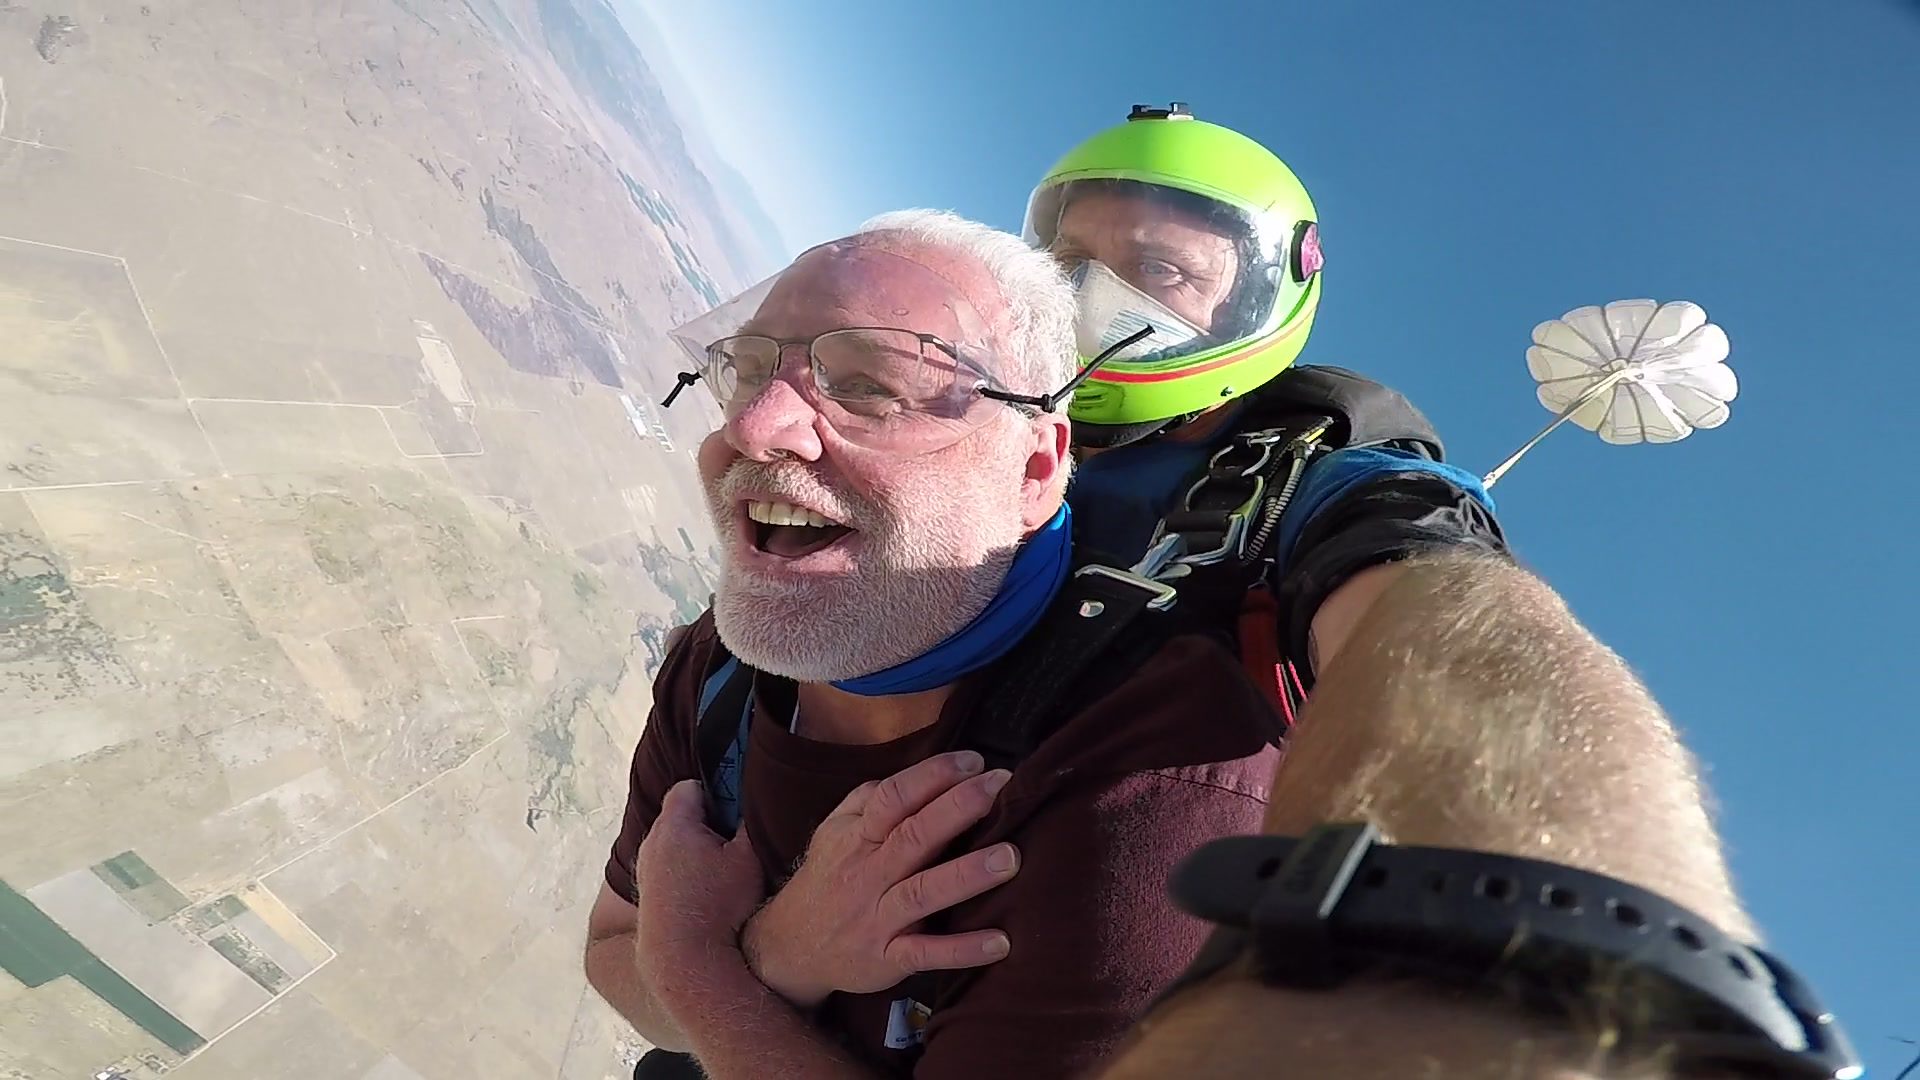 Ike Cleverly tandem skydive